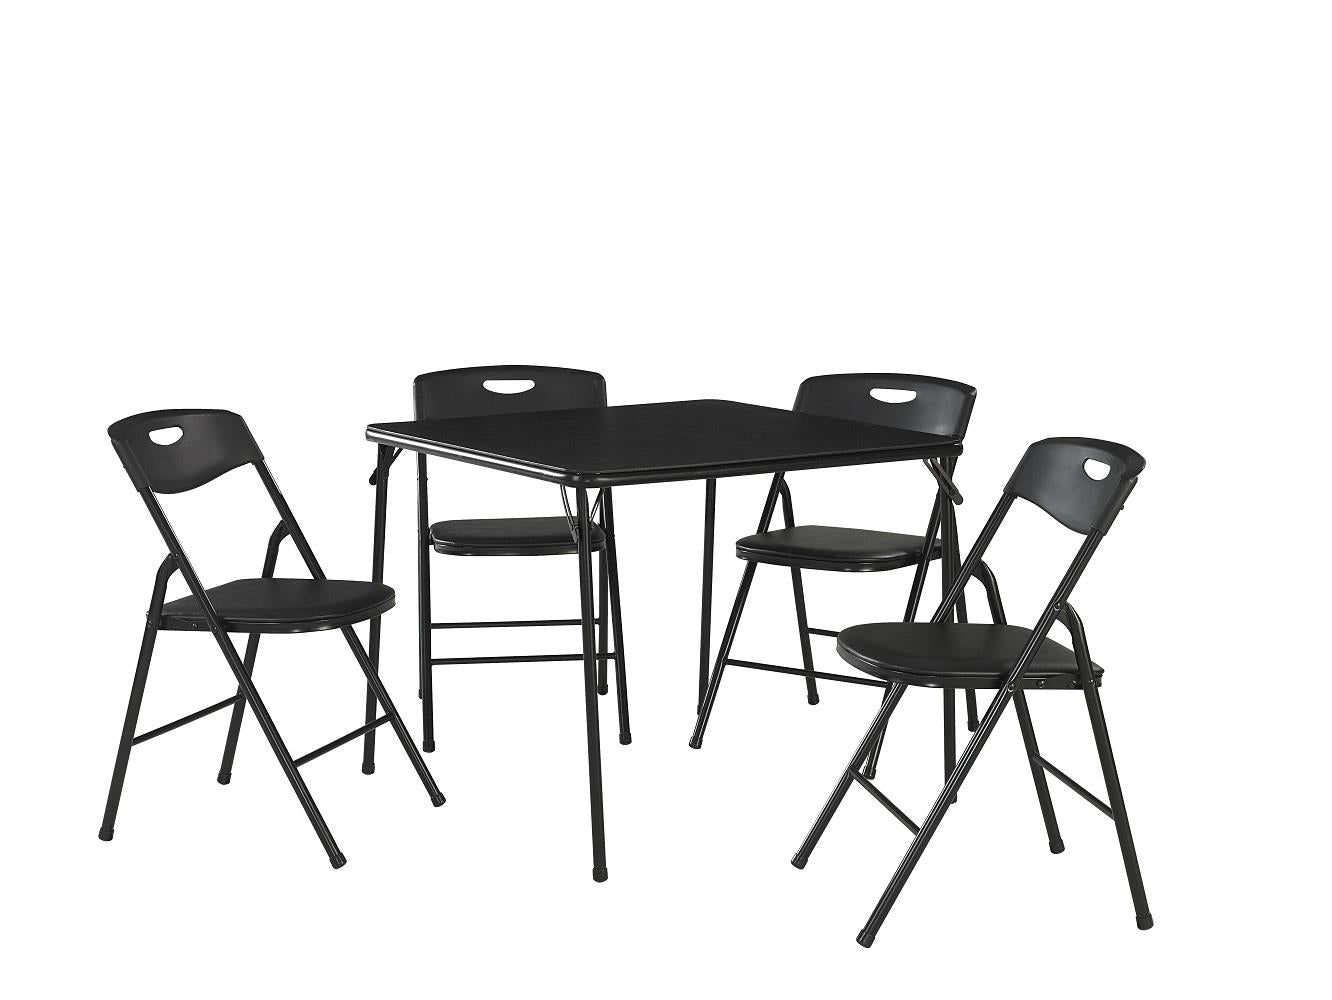 5-Piece Folding Table and Chair Set - Black - N/A